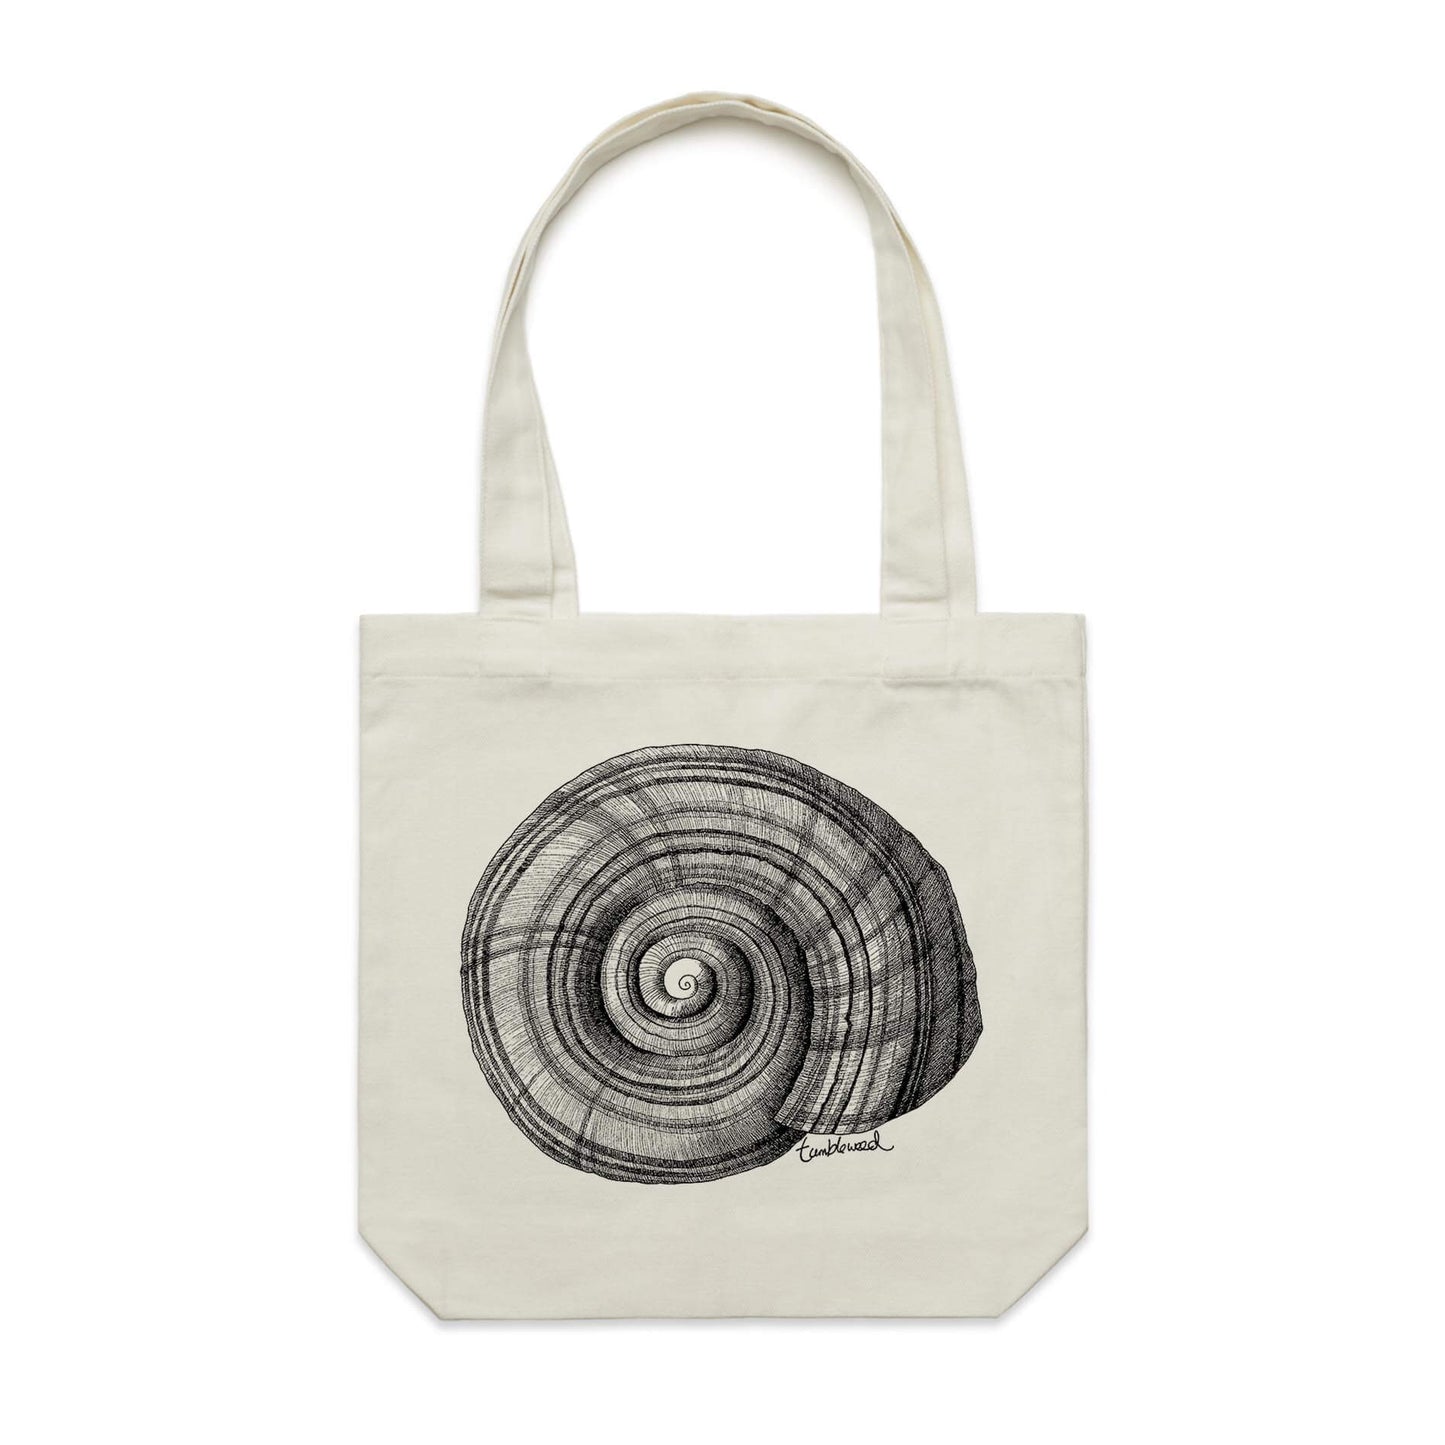 Cotton canvas tote bag with a screen printed NZ Snail design.